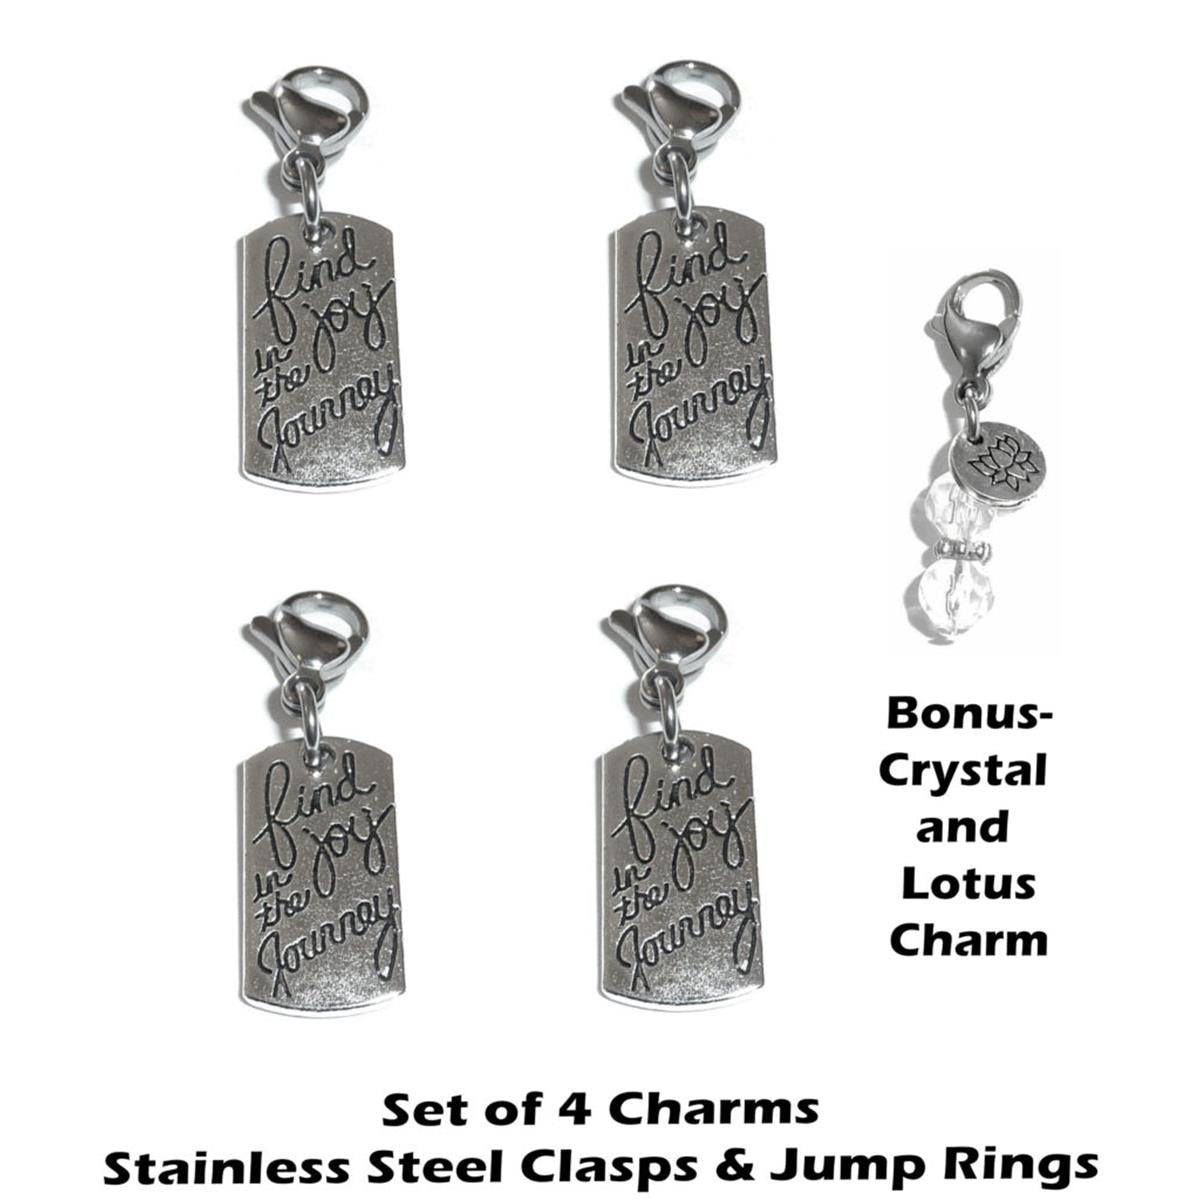 4 Pack Find Joy Clip On Charms - Inspirational Charms Clip On Anywhere